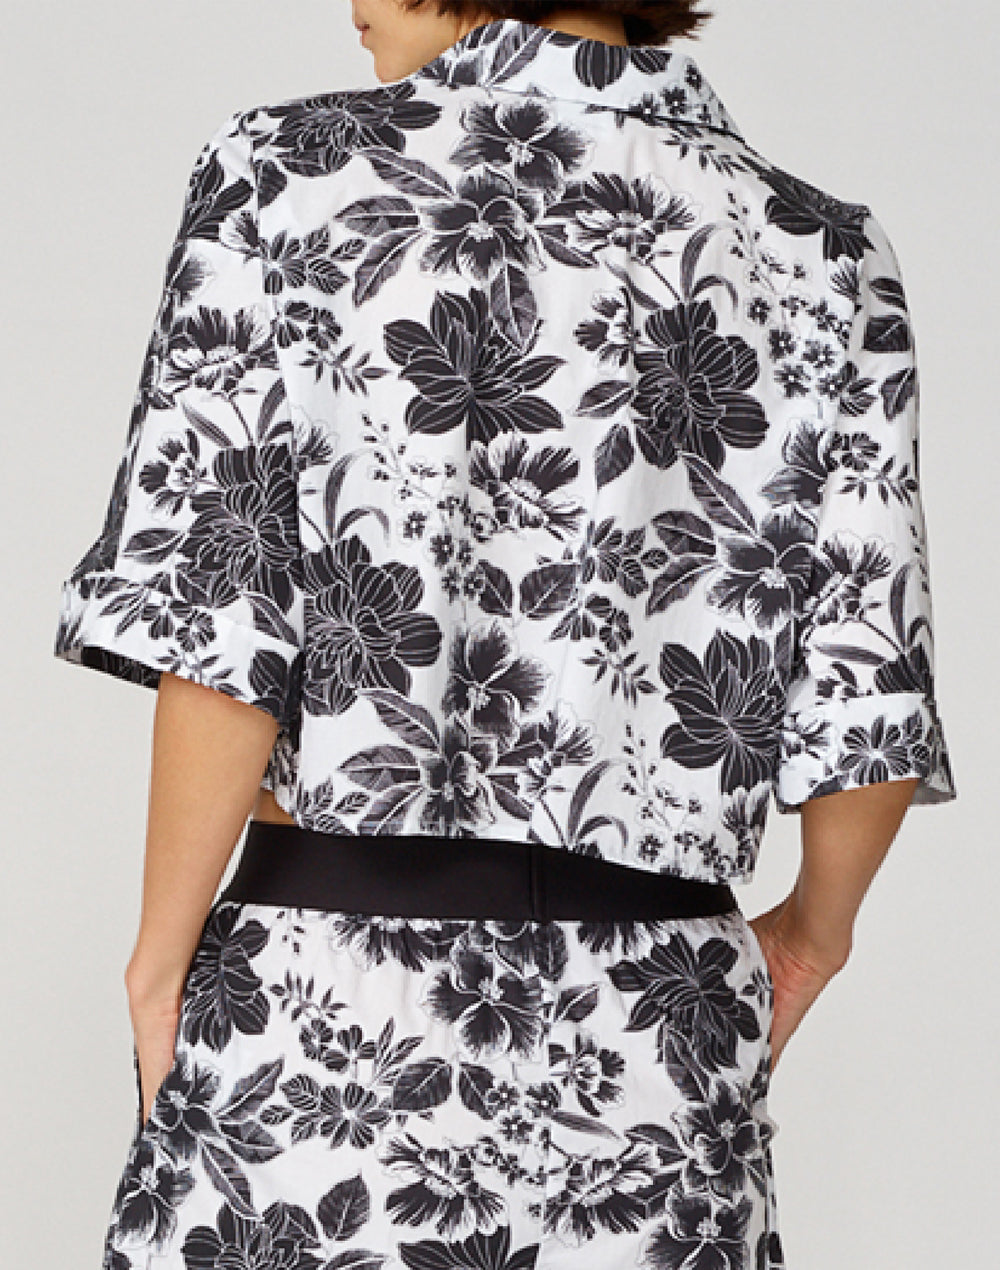 COTTON POPLIN SHIRT WITH FLORAL PRINT